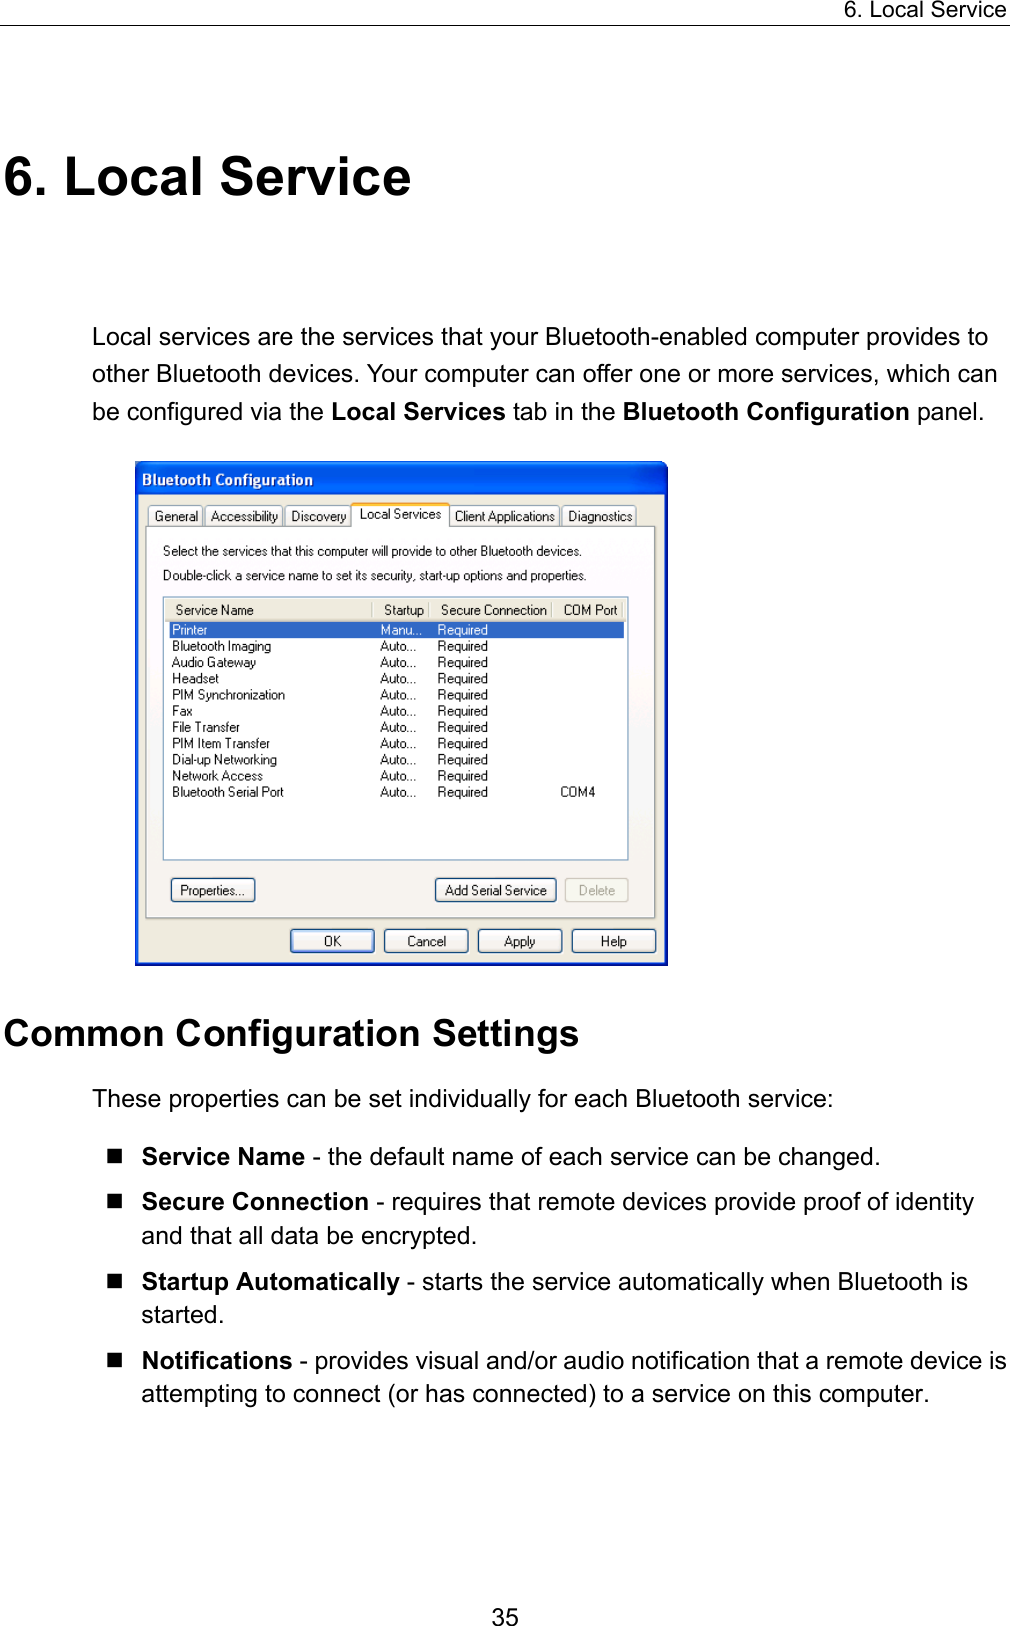 6. Local Service 35 6. Local Service Local services are the services that your Bluetooth-enabled computer provides to other Bluetooth devices. Your computer can offer one or more services, which can be configured via the Local Services tab in the Bluetooth Configuration panel.  Common Configuration Settings These properties can be set individually for each Bluetooth service:  Service Name - the default name of each service can be changed.  Secure Connection - requires that remote devices provide proof of identity and that all data be encrypted.  Startup Automatically - starts the service automatically when Bluetooth is started.  Notifications - provides visual and/or audio notification that a remote device is attempting to connect (or has connected) to a service on this computer. 